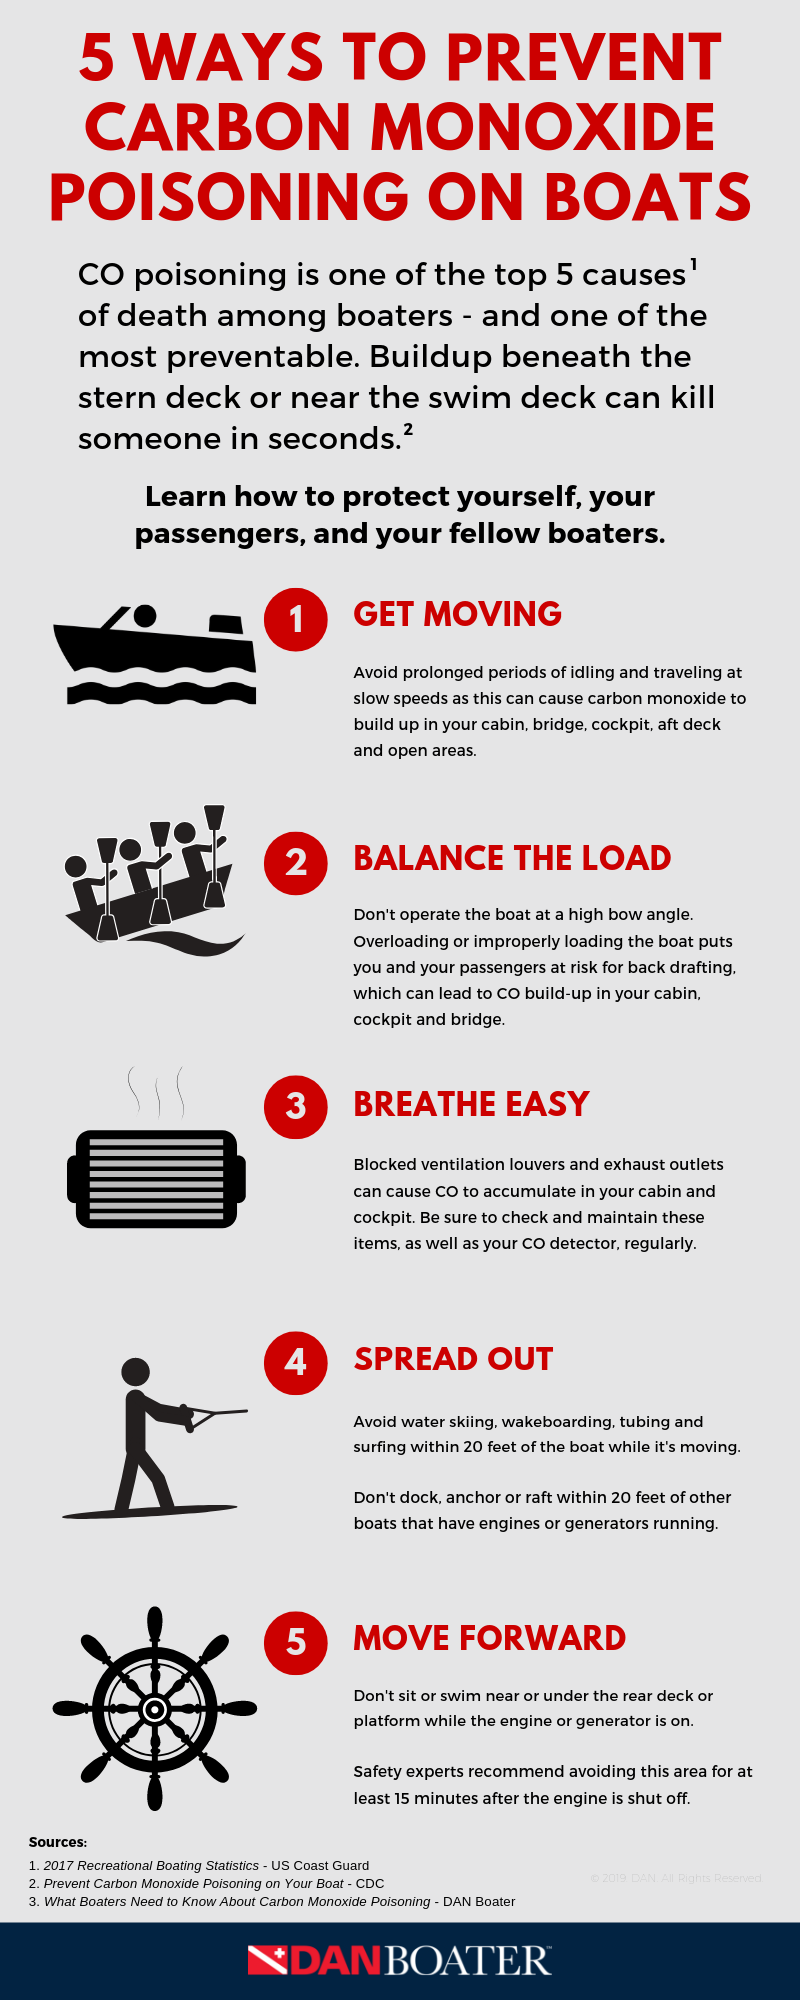 5 Ways to Prevent Carbon Monoxide Poisoning on Boats (infographic)